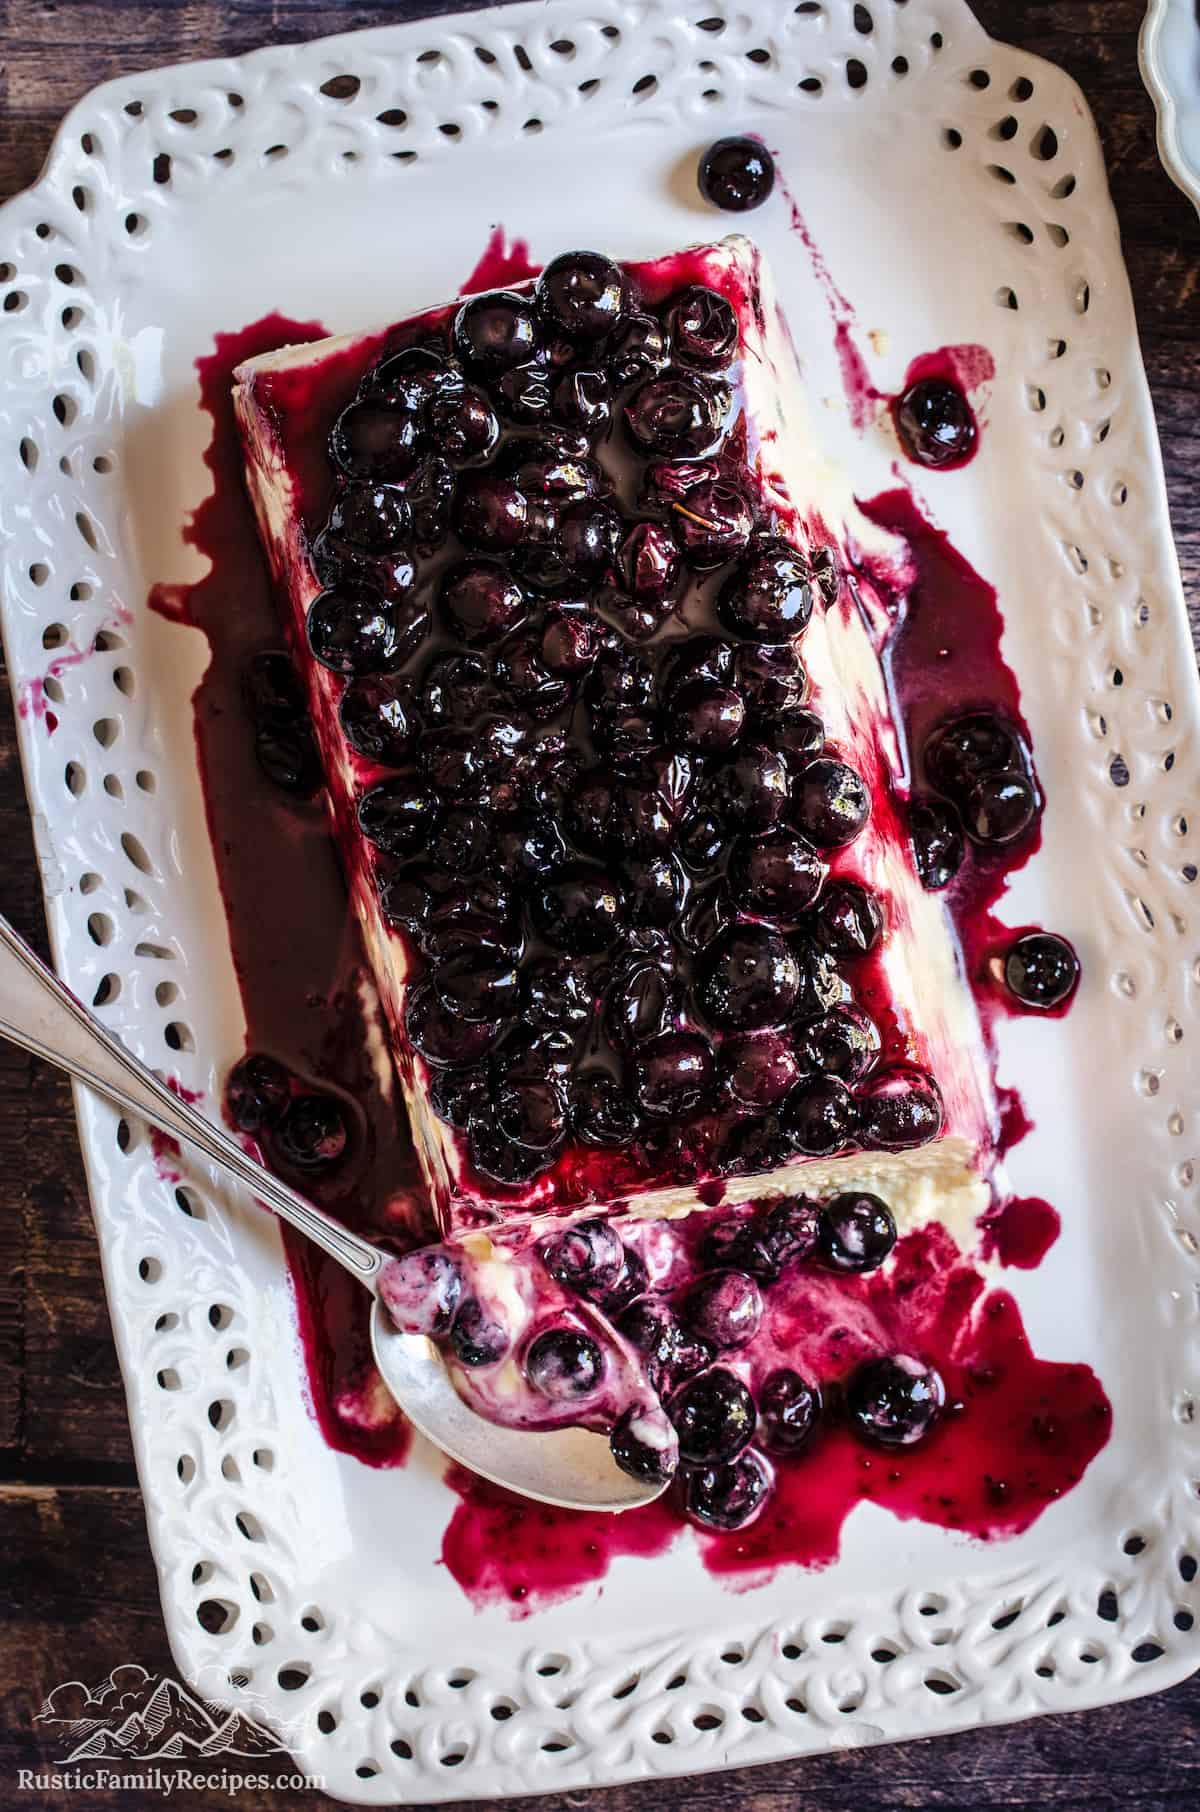 Top view of lemon blueberry semifreddo on a plate topped with homemade blueberry sauce.